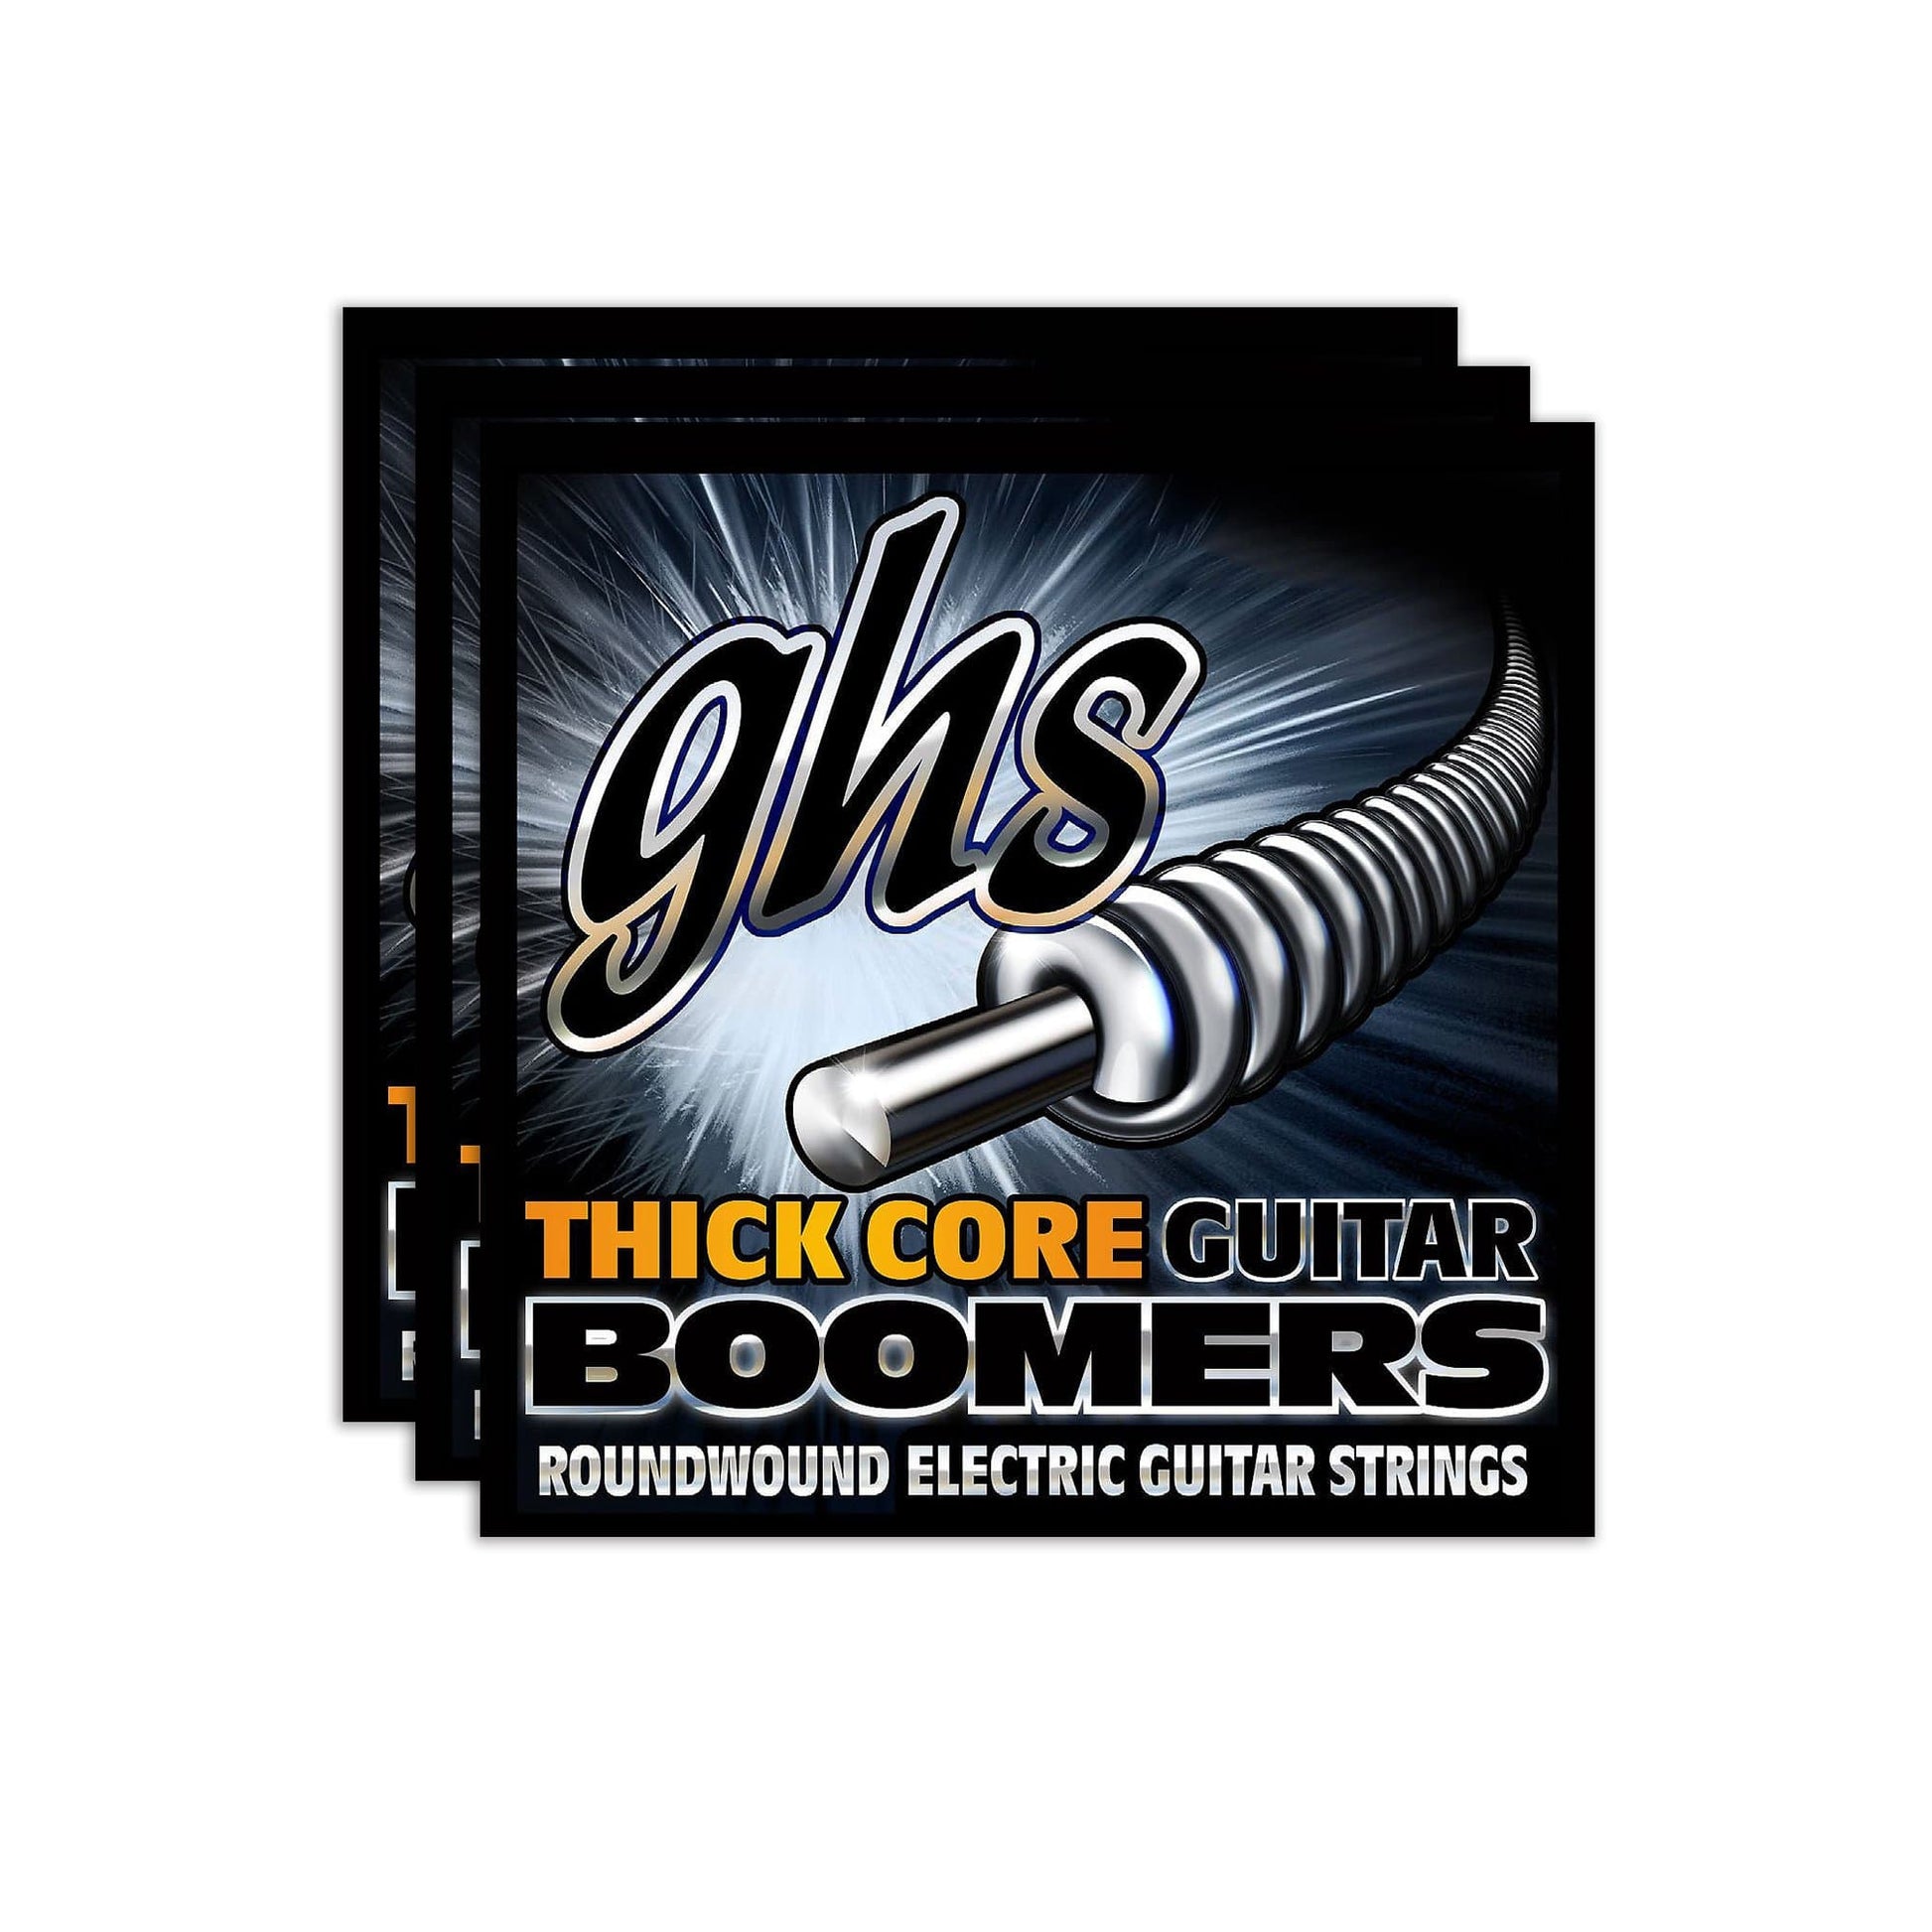 GHS HC-GBL Thick Core Boomers 10-48 Light 3 Pack Bundle Accessories / Strings / Guitar Strings